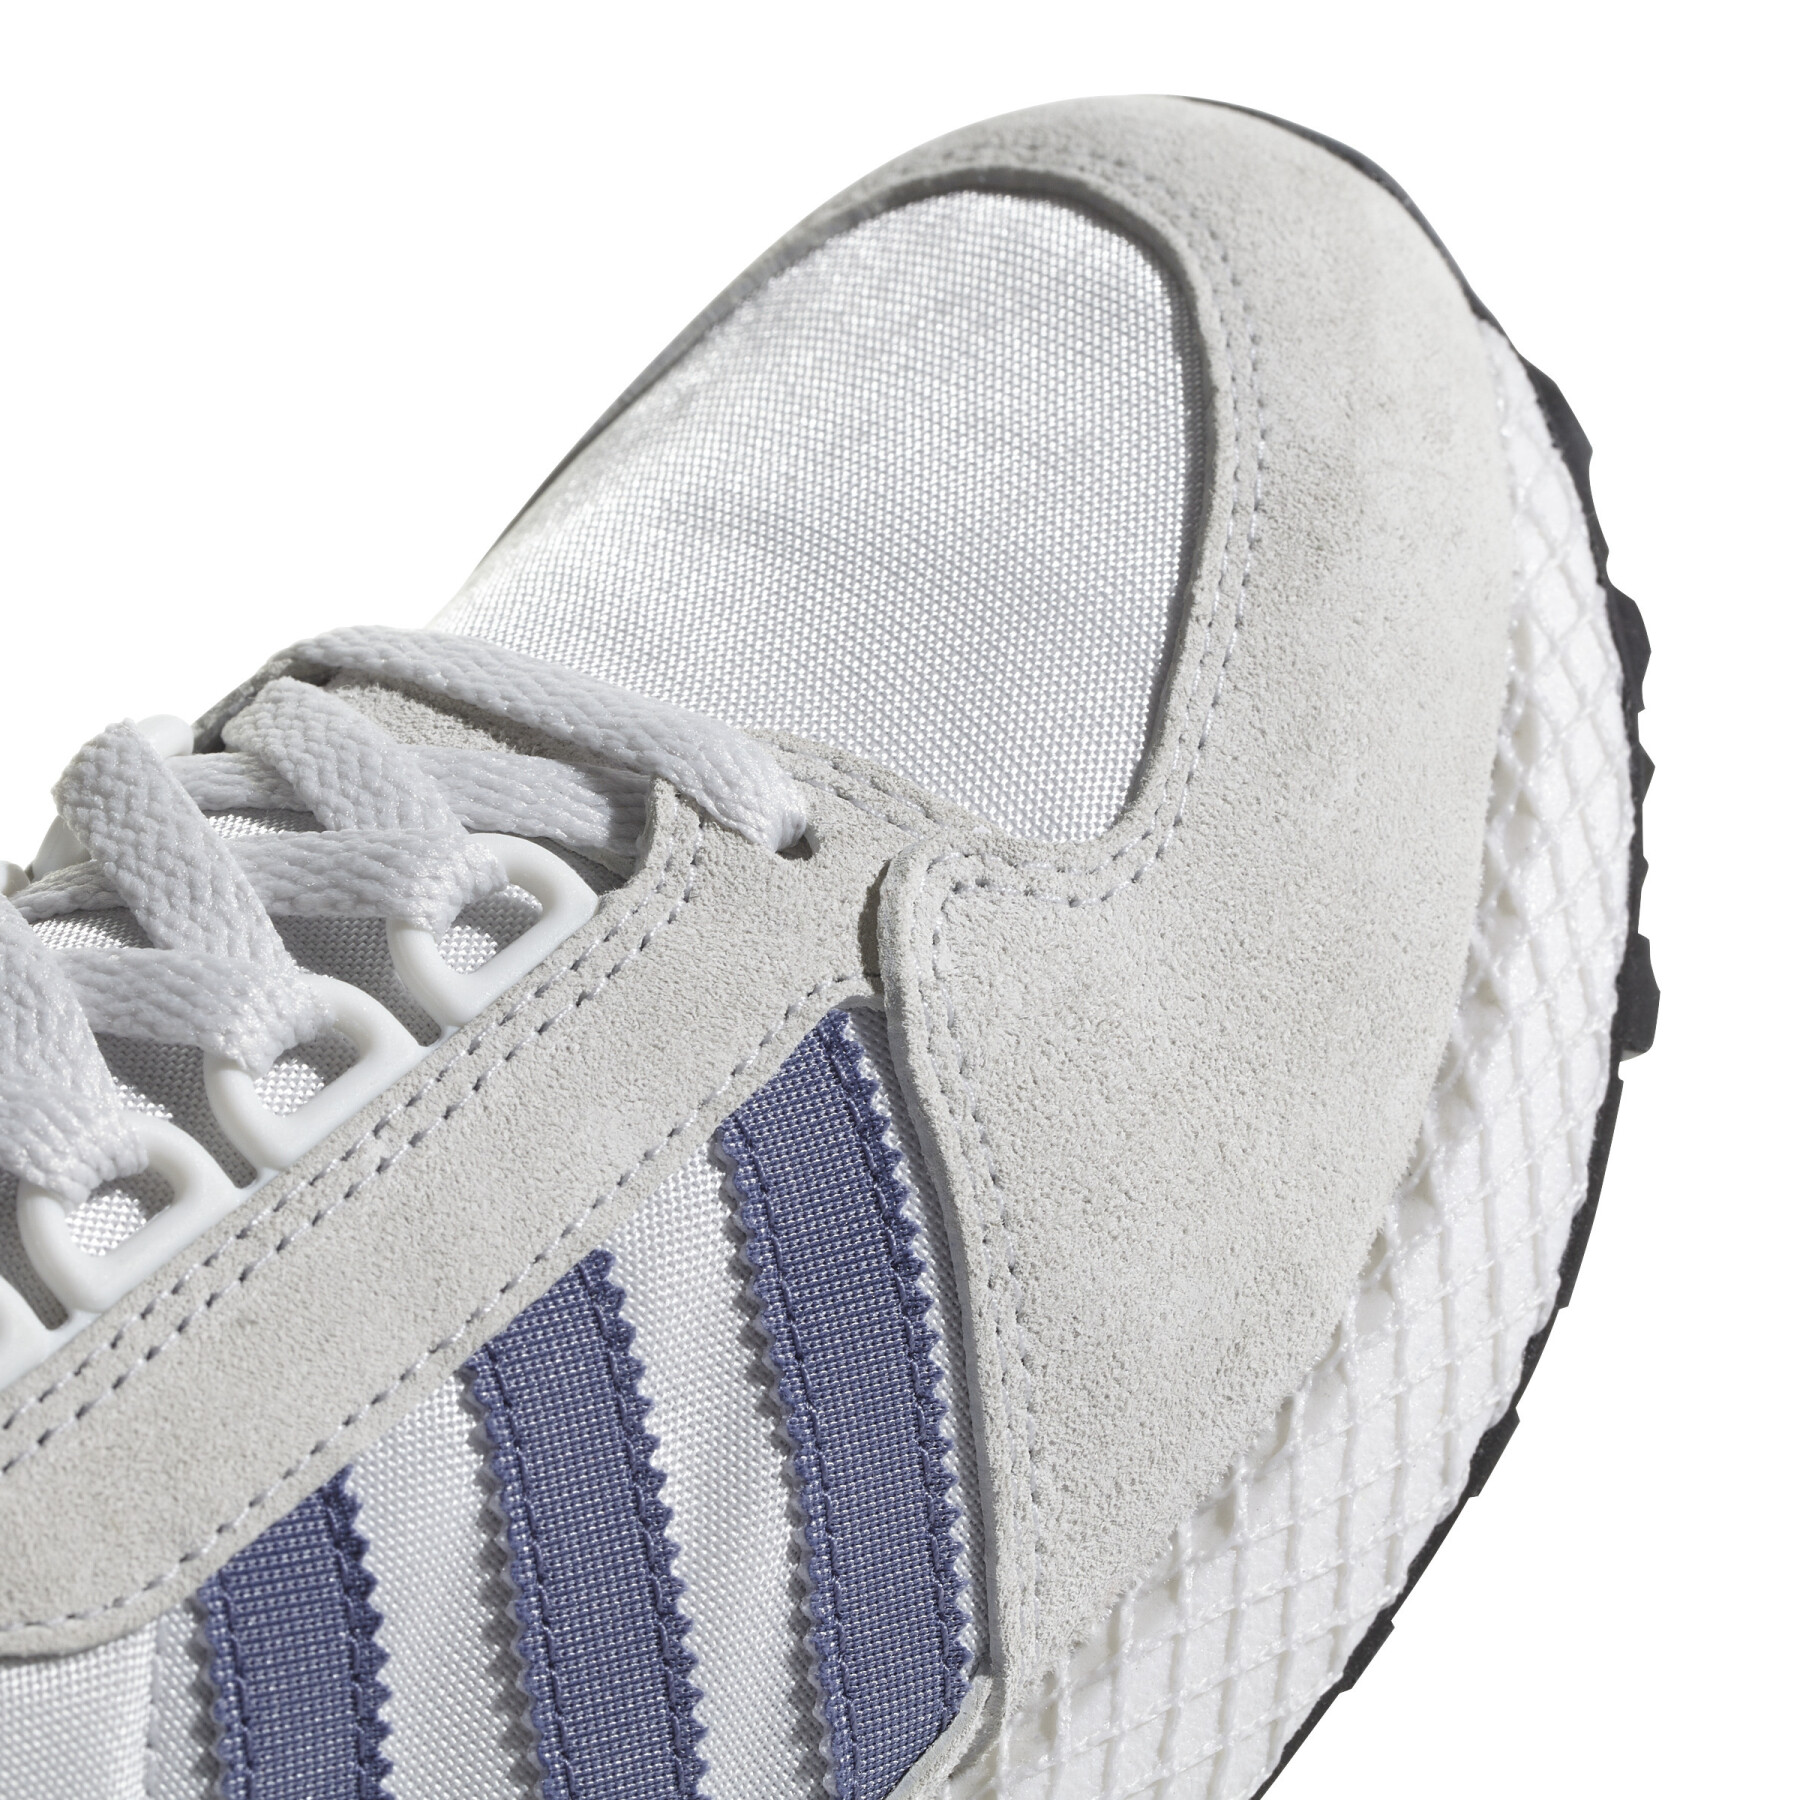 adidas Forest Grove Women's Sneakers